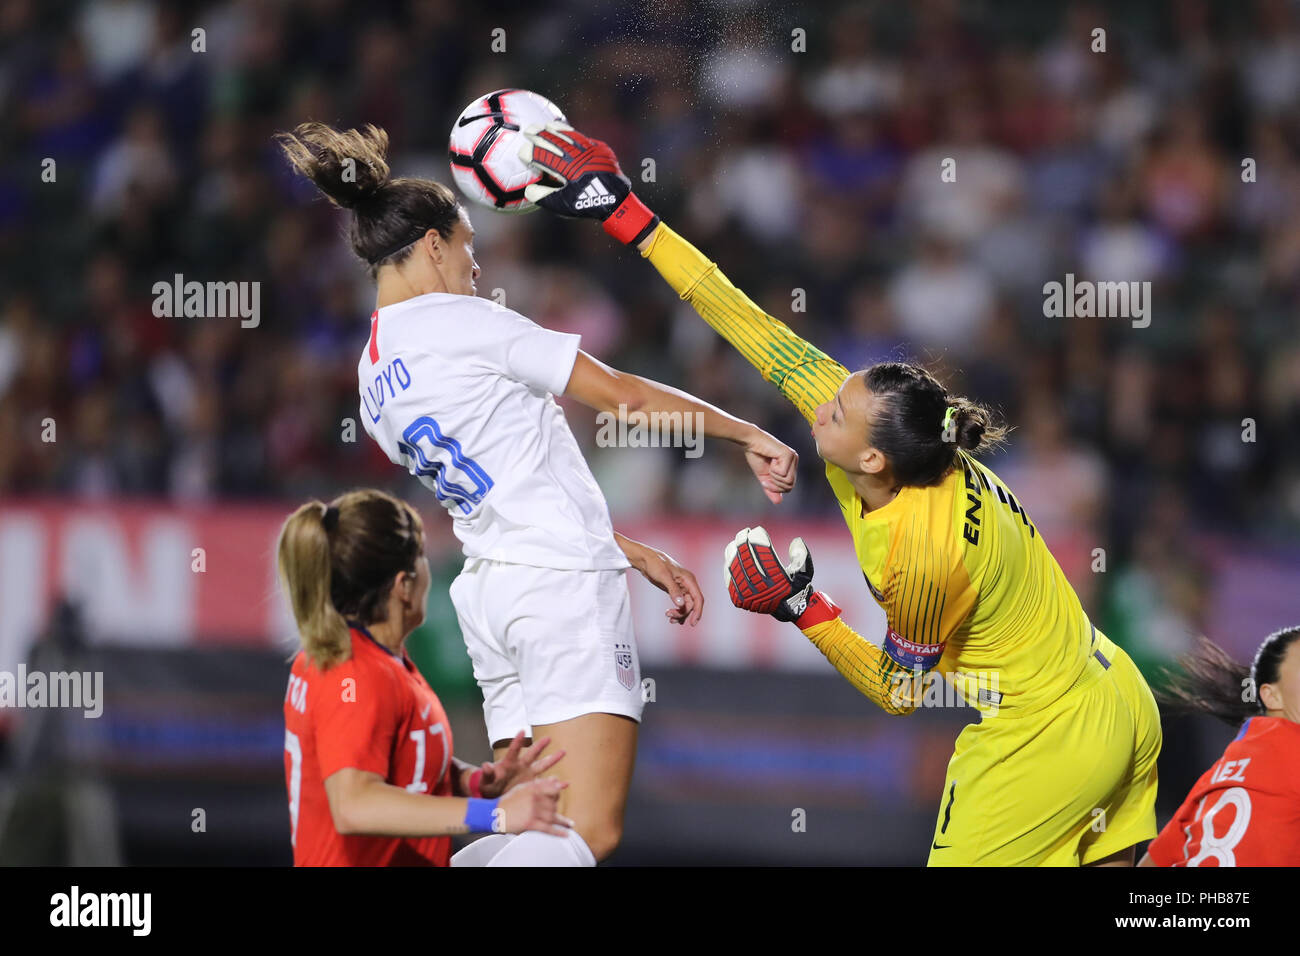 August 31, 2018: Chile goalkeeper Christiane Endler (1) makes a save despite the header attempt by midfielder Carli Lloyd (10) during the game between Chile and USA on August 31, 2018, at the StubHub Center in Carson, CA. USA. (Photo by Peter Joneleit) Stock Photo